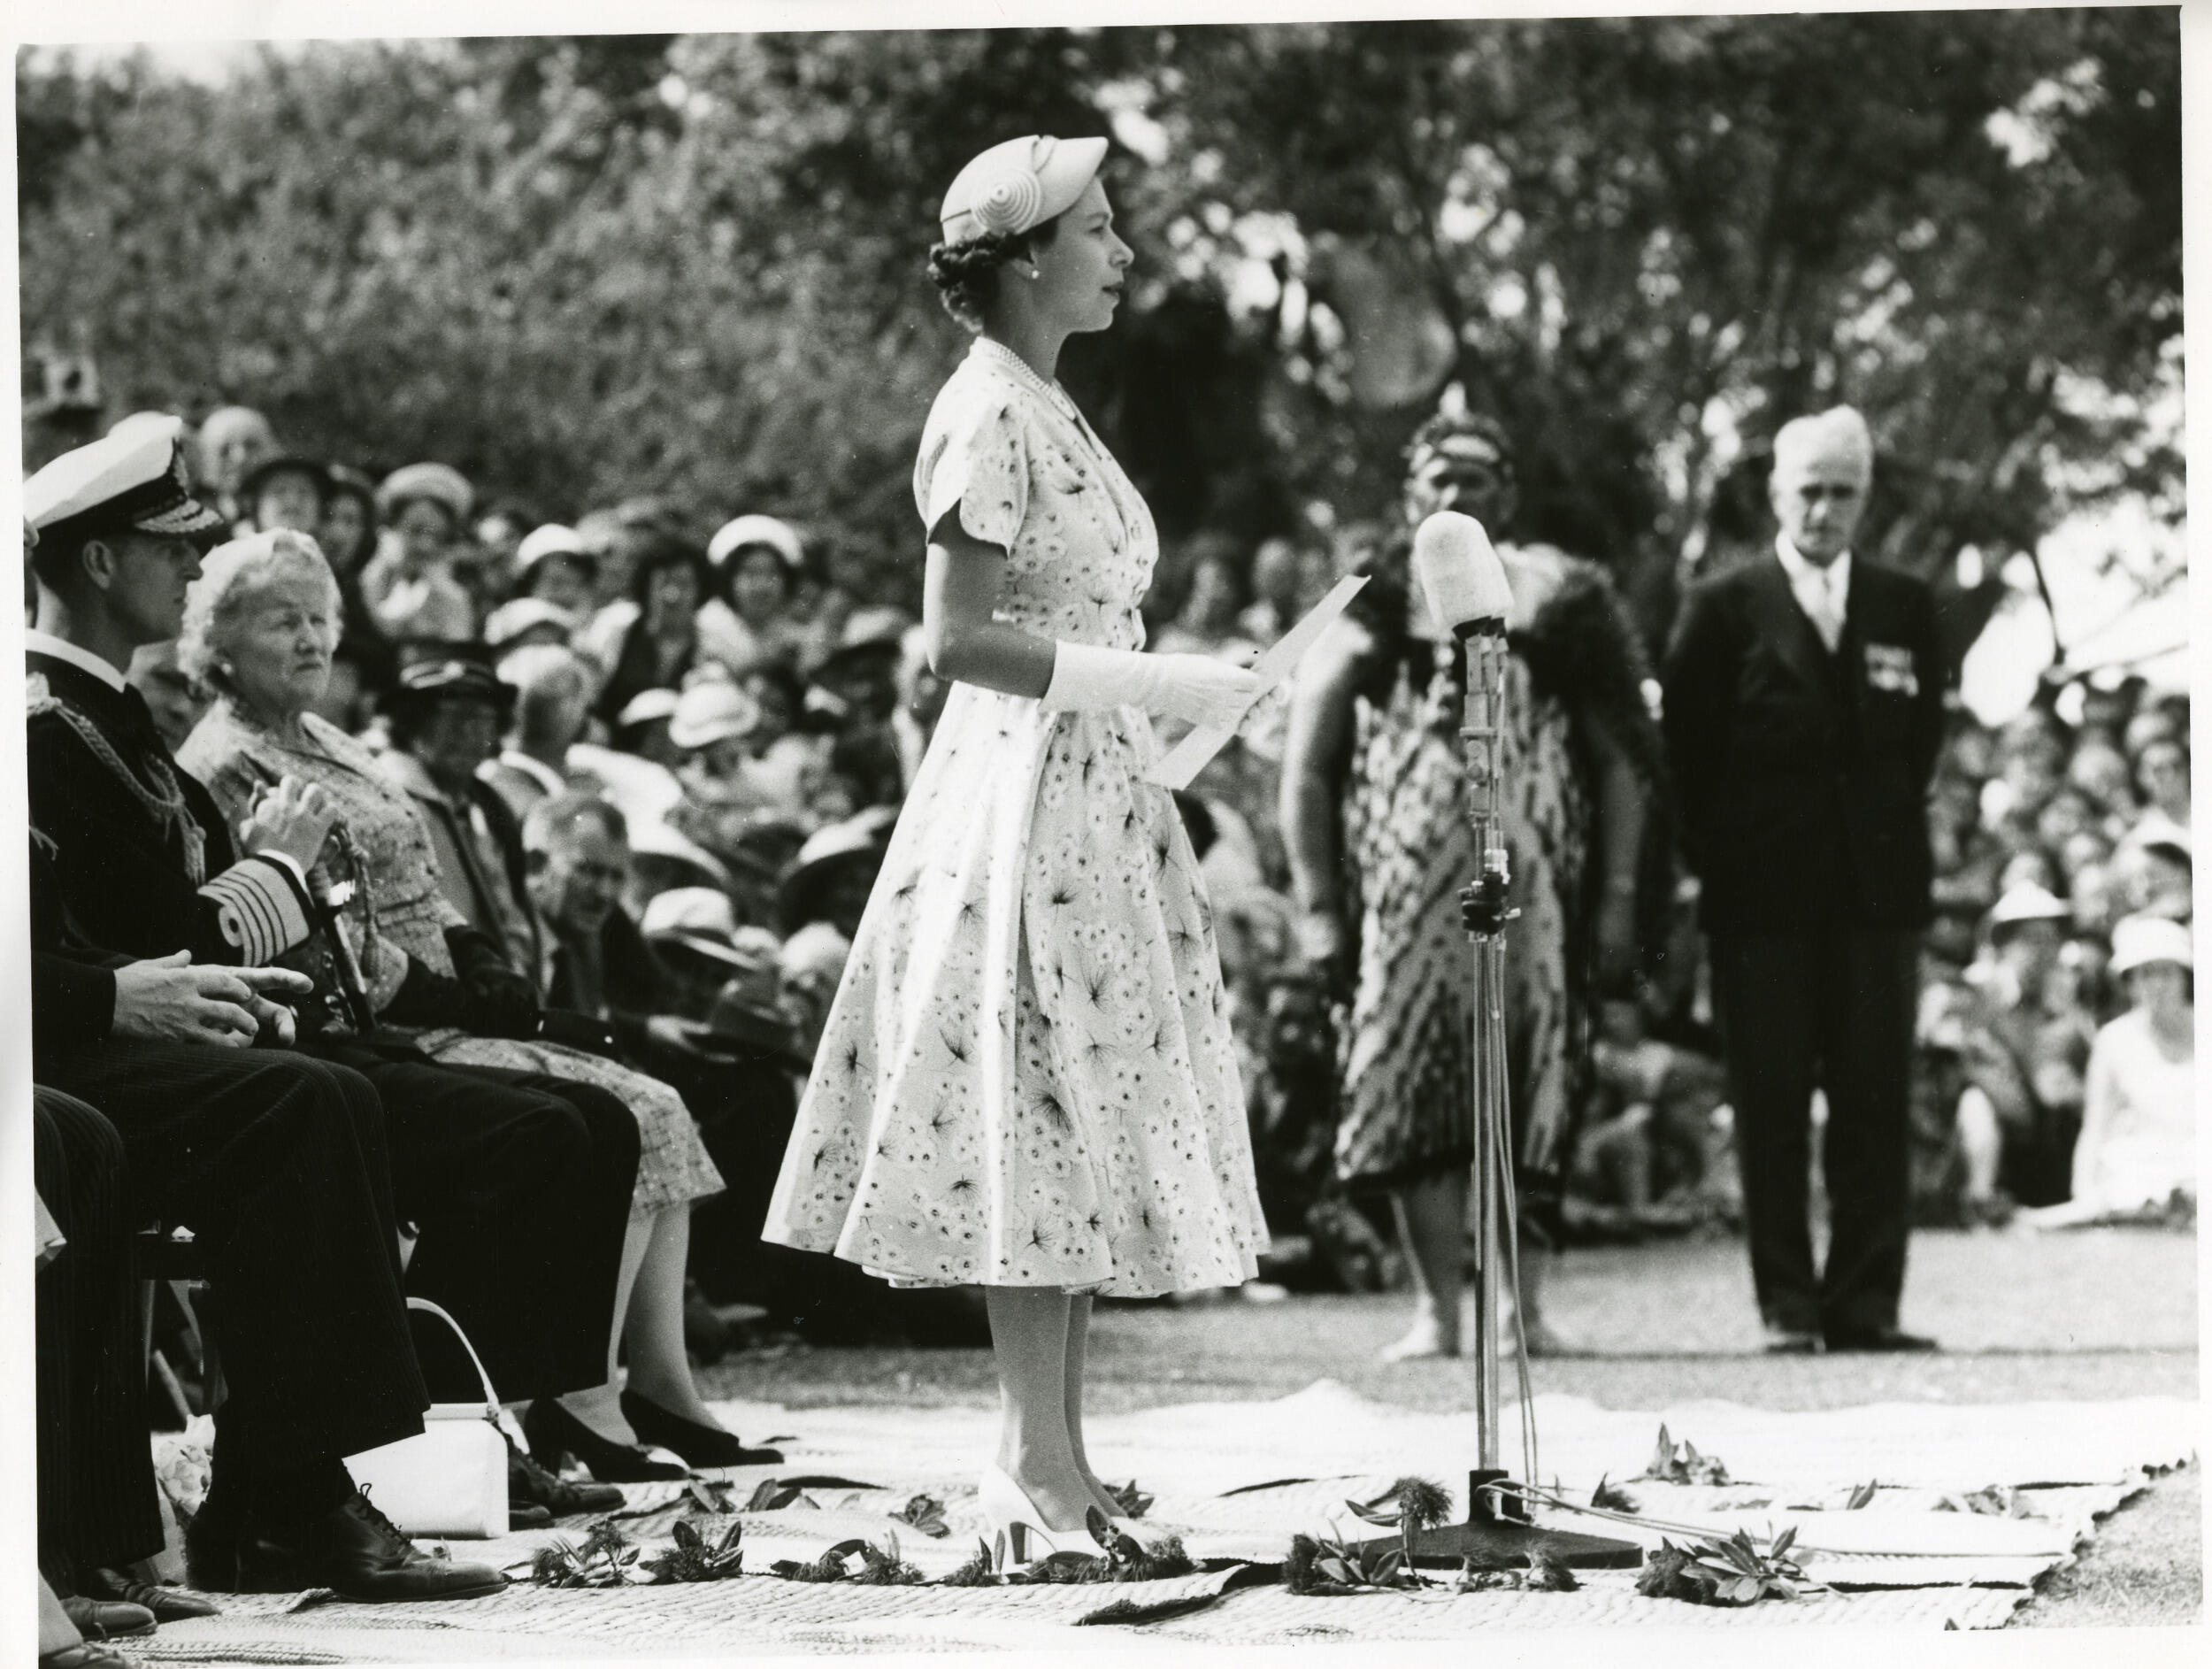 Queen Elizabeth II stands and speaks at a public event in New Zealand.